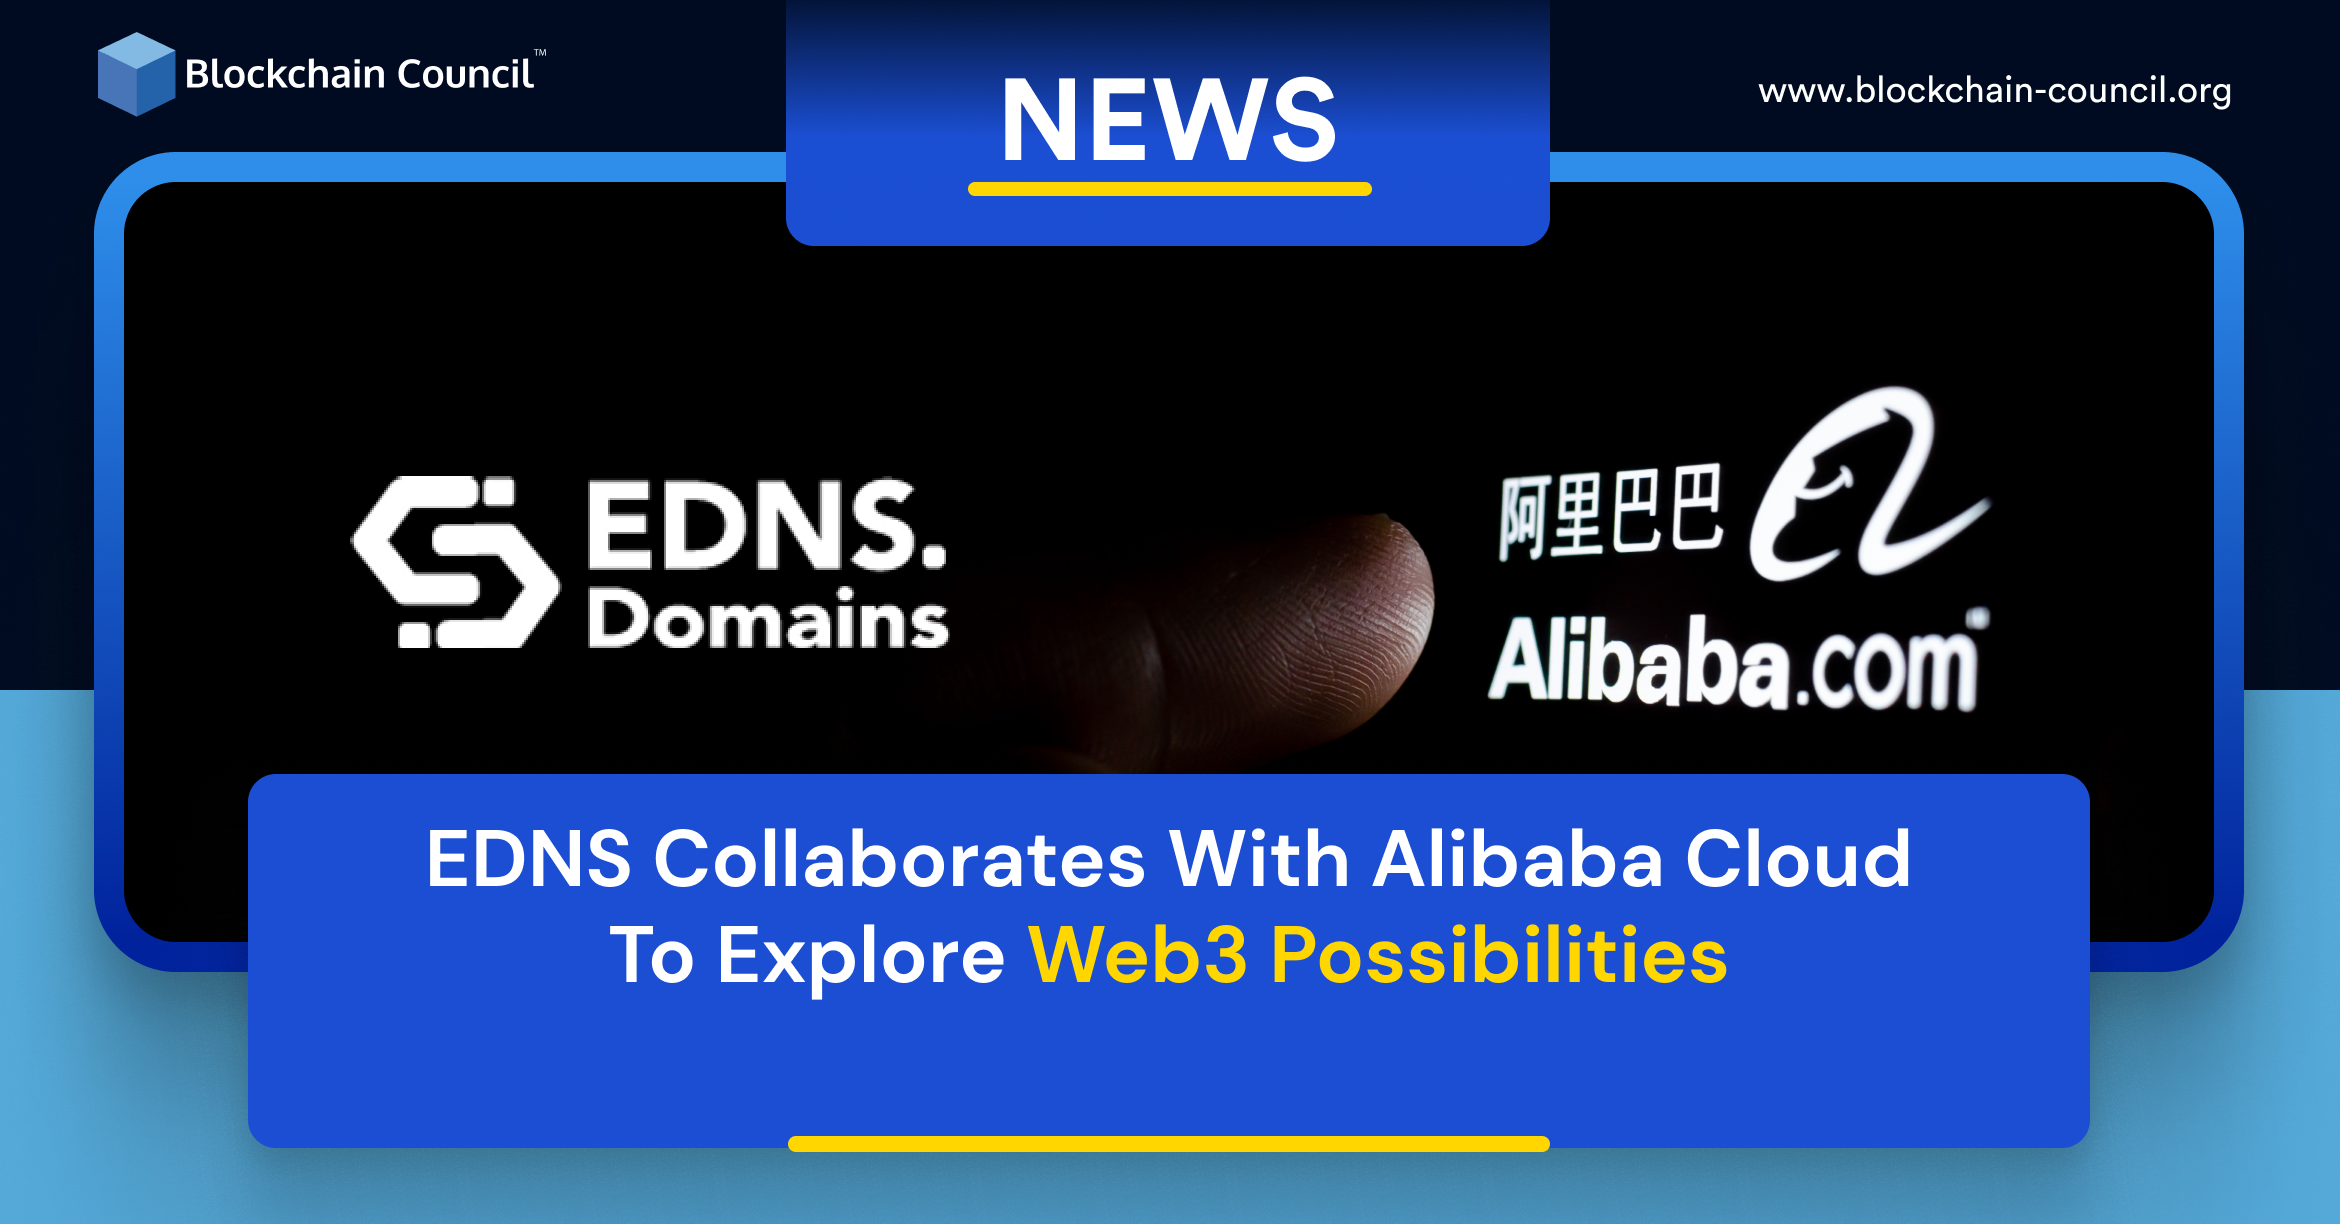 EDNS Collaborates With Alibaba Cloud To Explore Web3 Possibilities